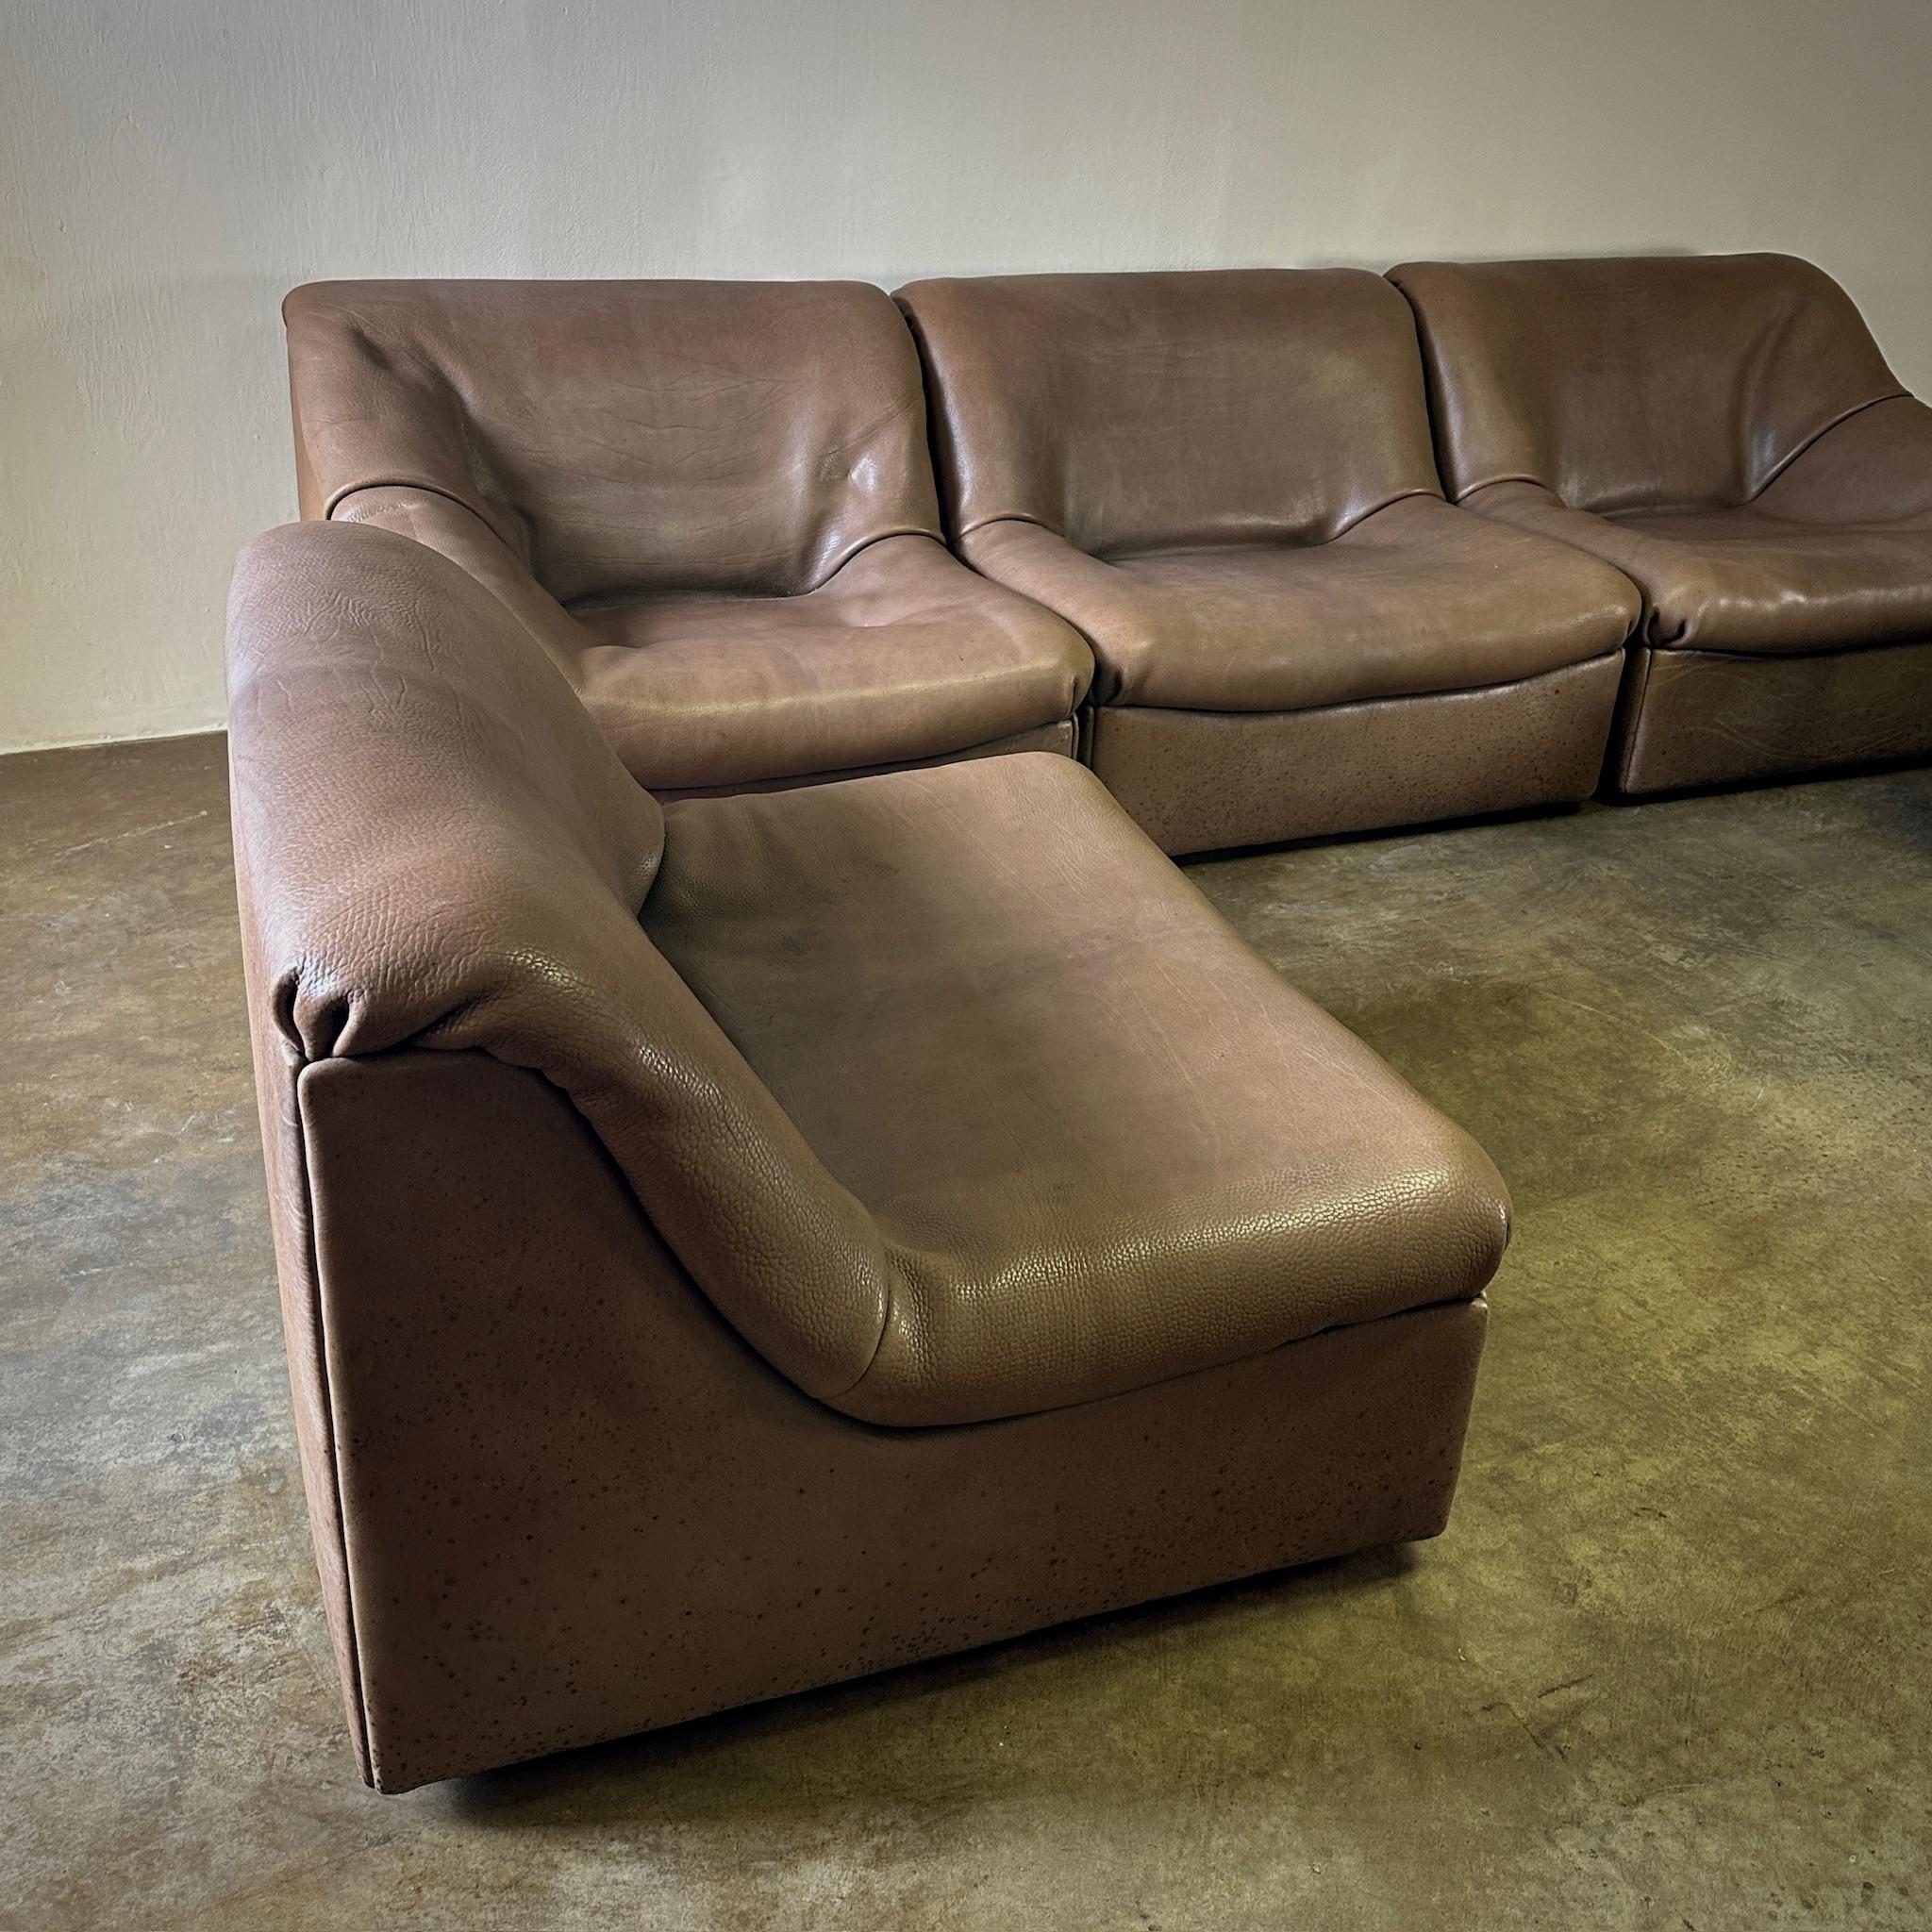 Sumptuous De Sede five piece sectional sofa chair set in softly worn brown leather that can be arranged in multiple iterations. A versatile, classic piece that could work well in all manner of spatial arrangements.

Switzerland, circa